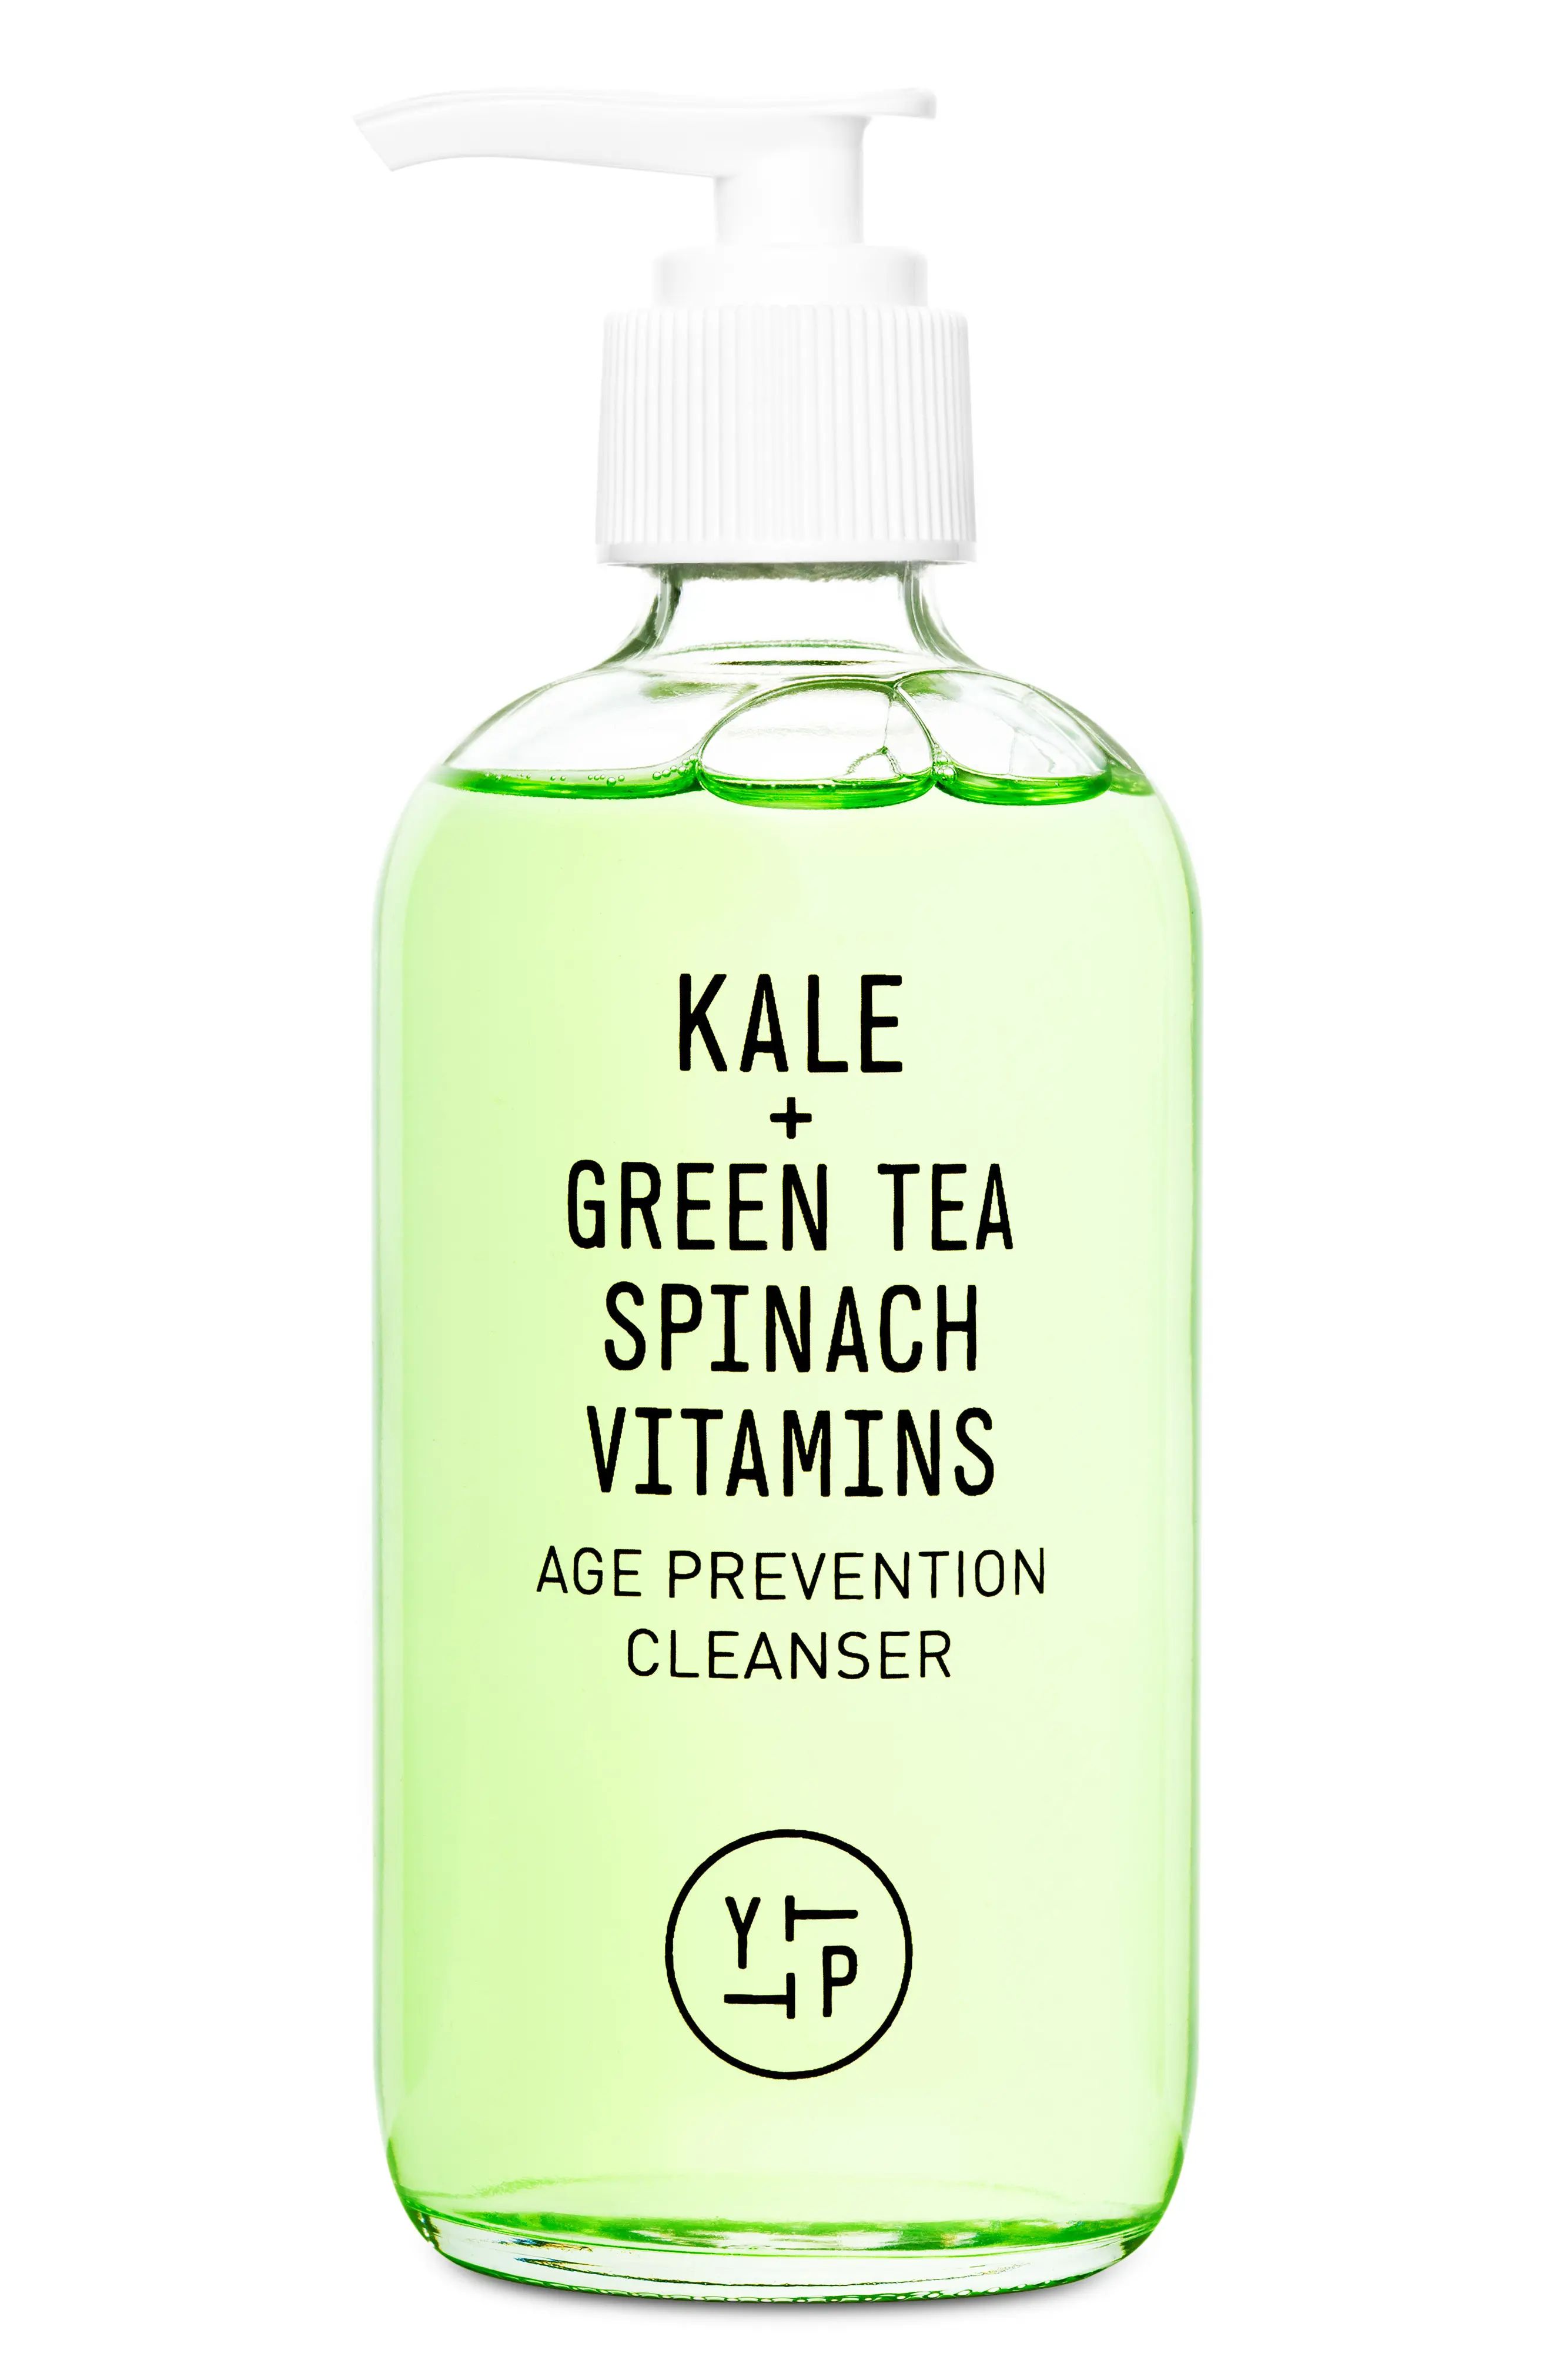 Youth To The People Superfood Cleanser, Size 2 oz | Nordstrom